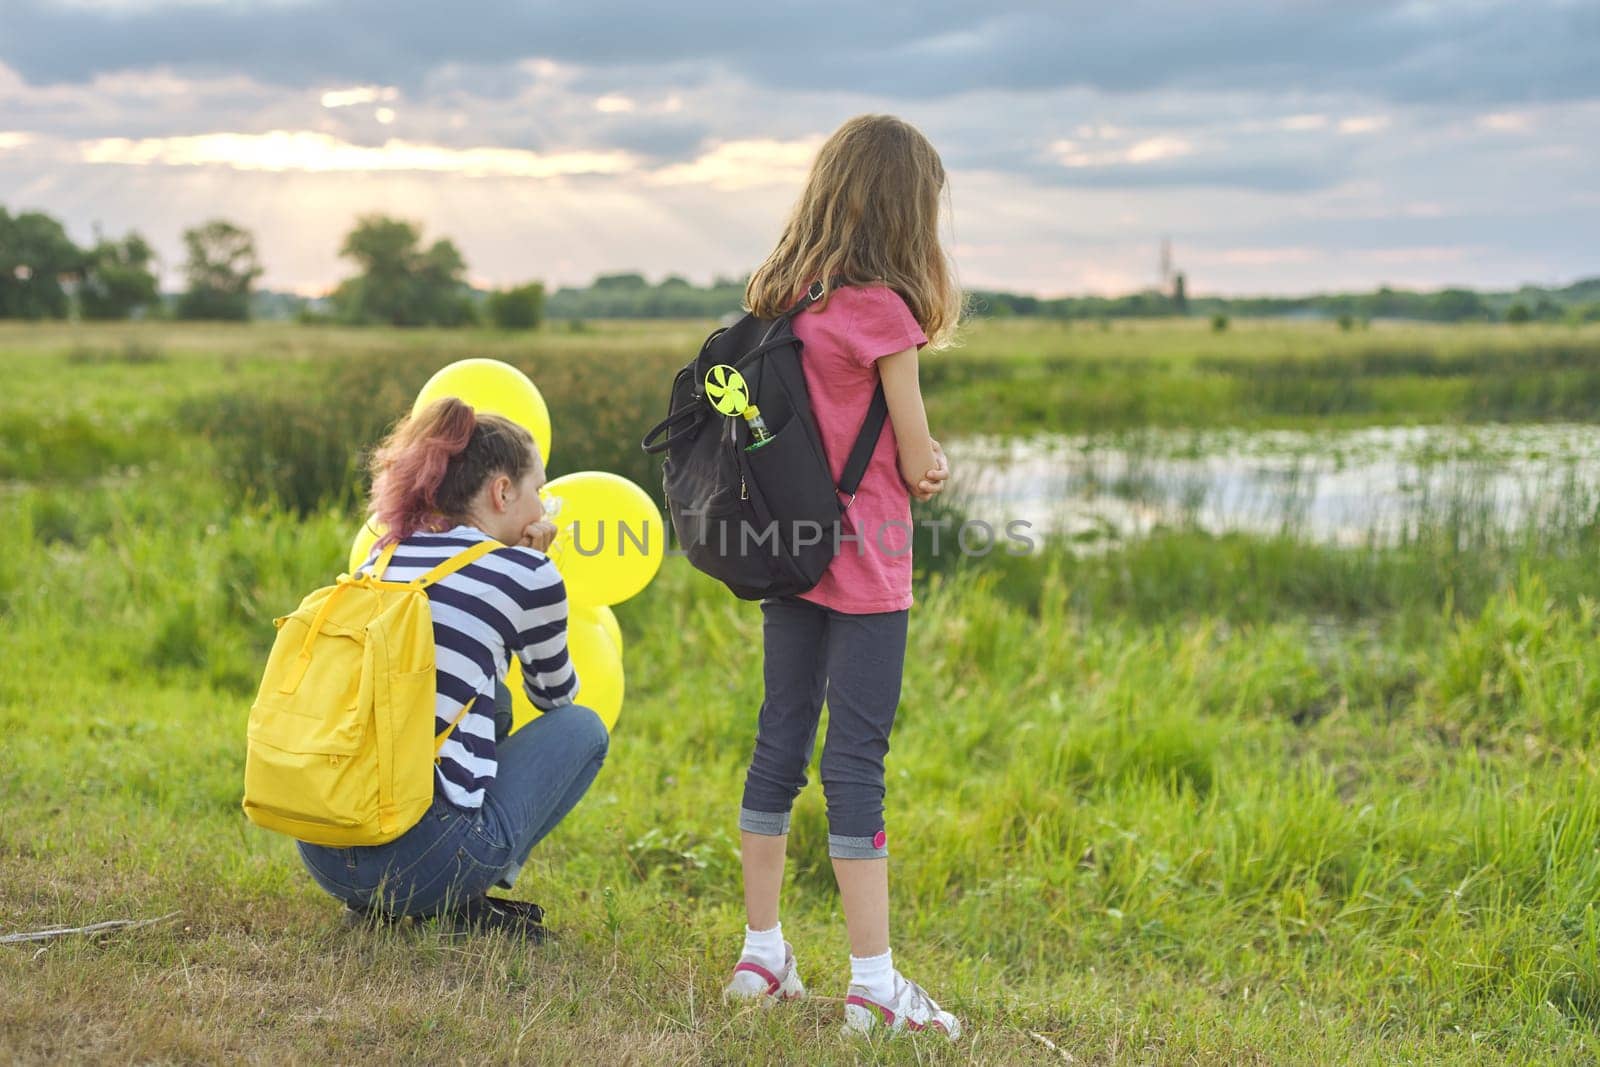 Two girls with balloons backpacks back in nature, children near the lake in the meadow, summer evening